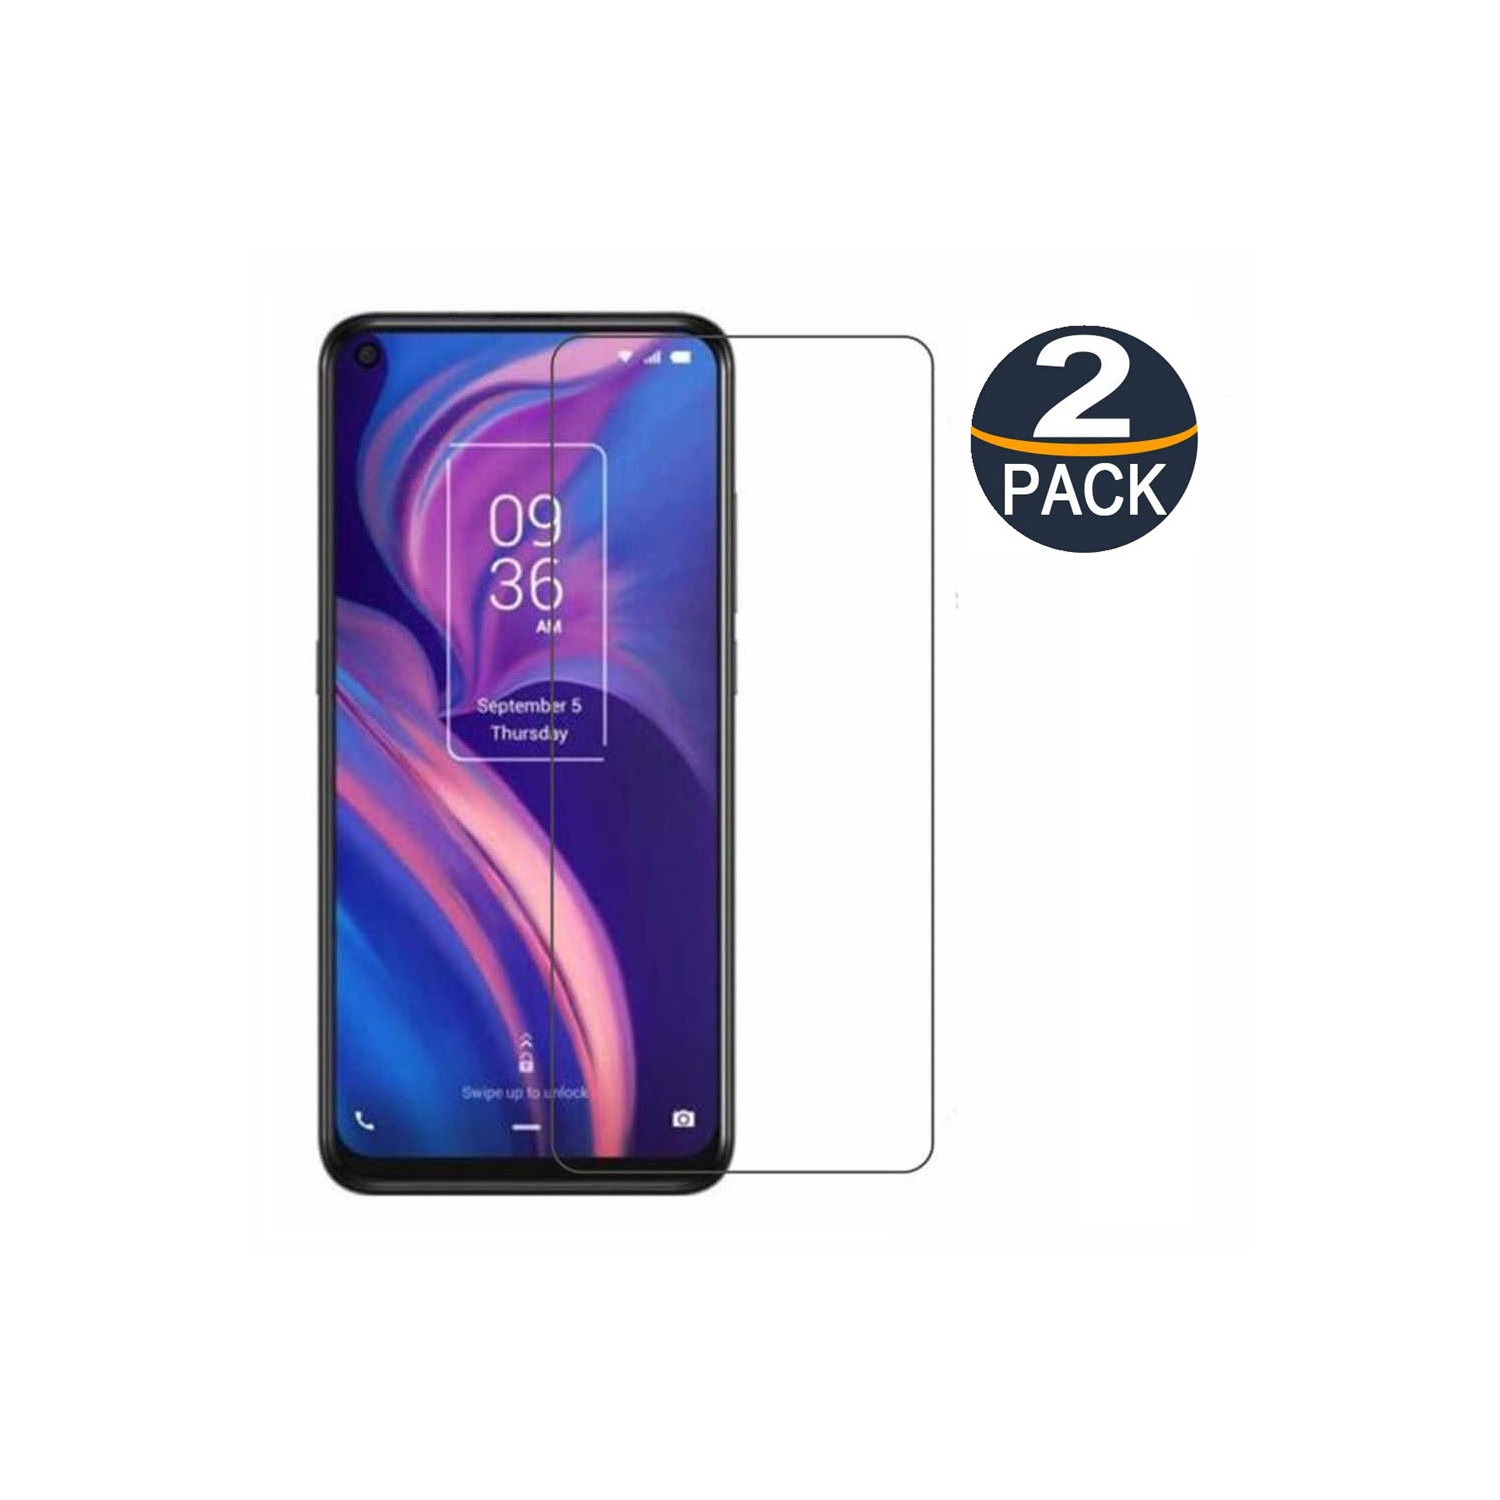 【2 Packs】 CSmart Premium Tempered Glass Screen Protector for TCL 10 Pro, Case Friendly & Bubble Free